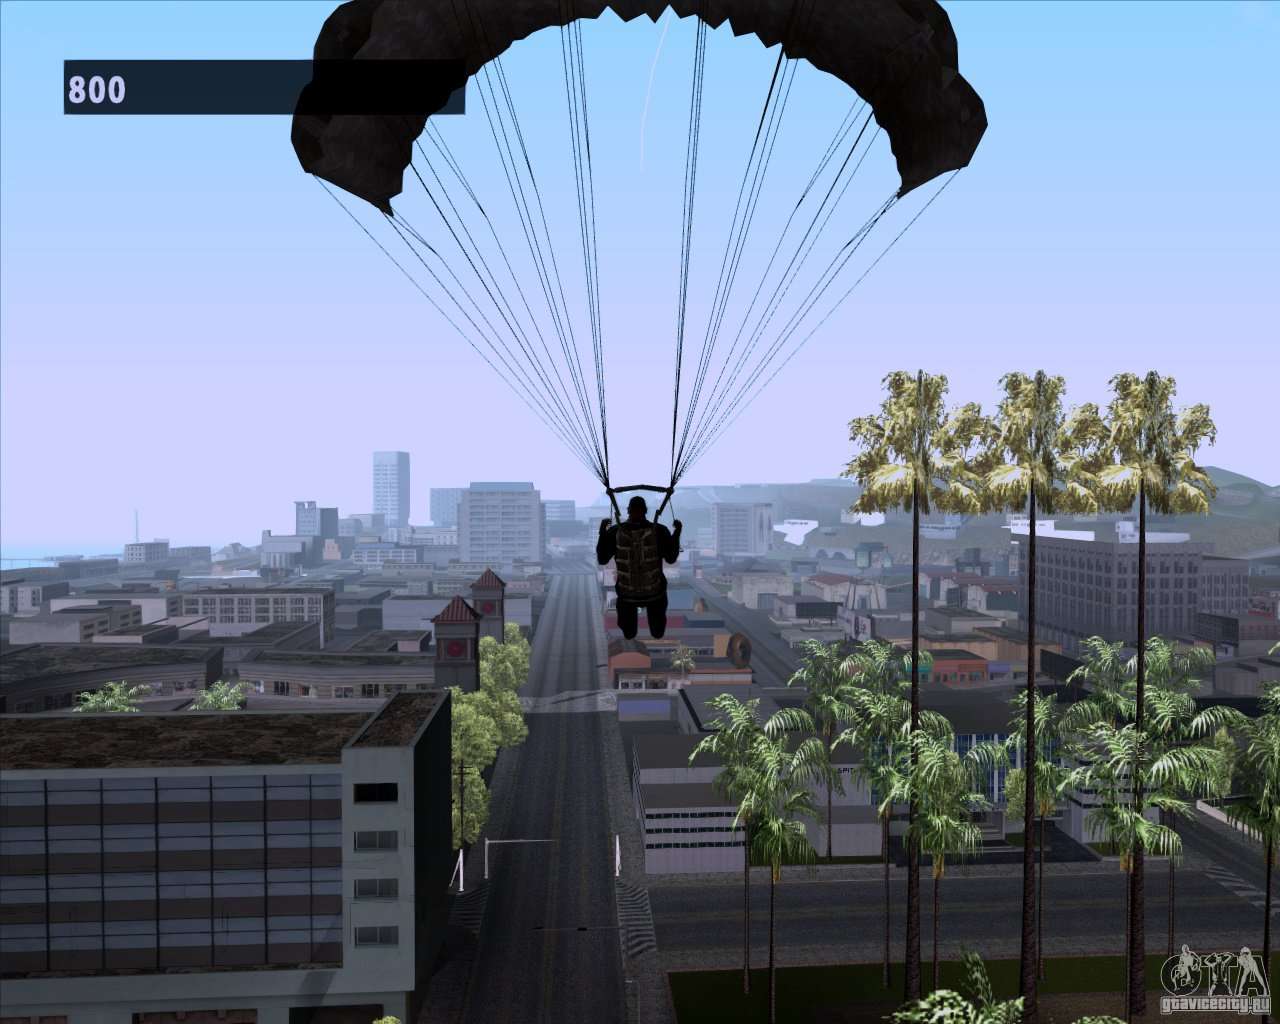 gta san andreas how to open parachute pirated version